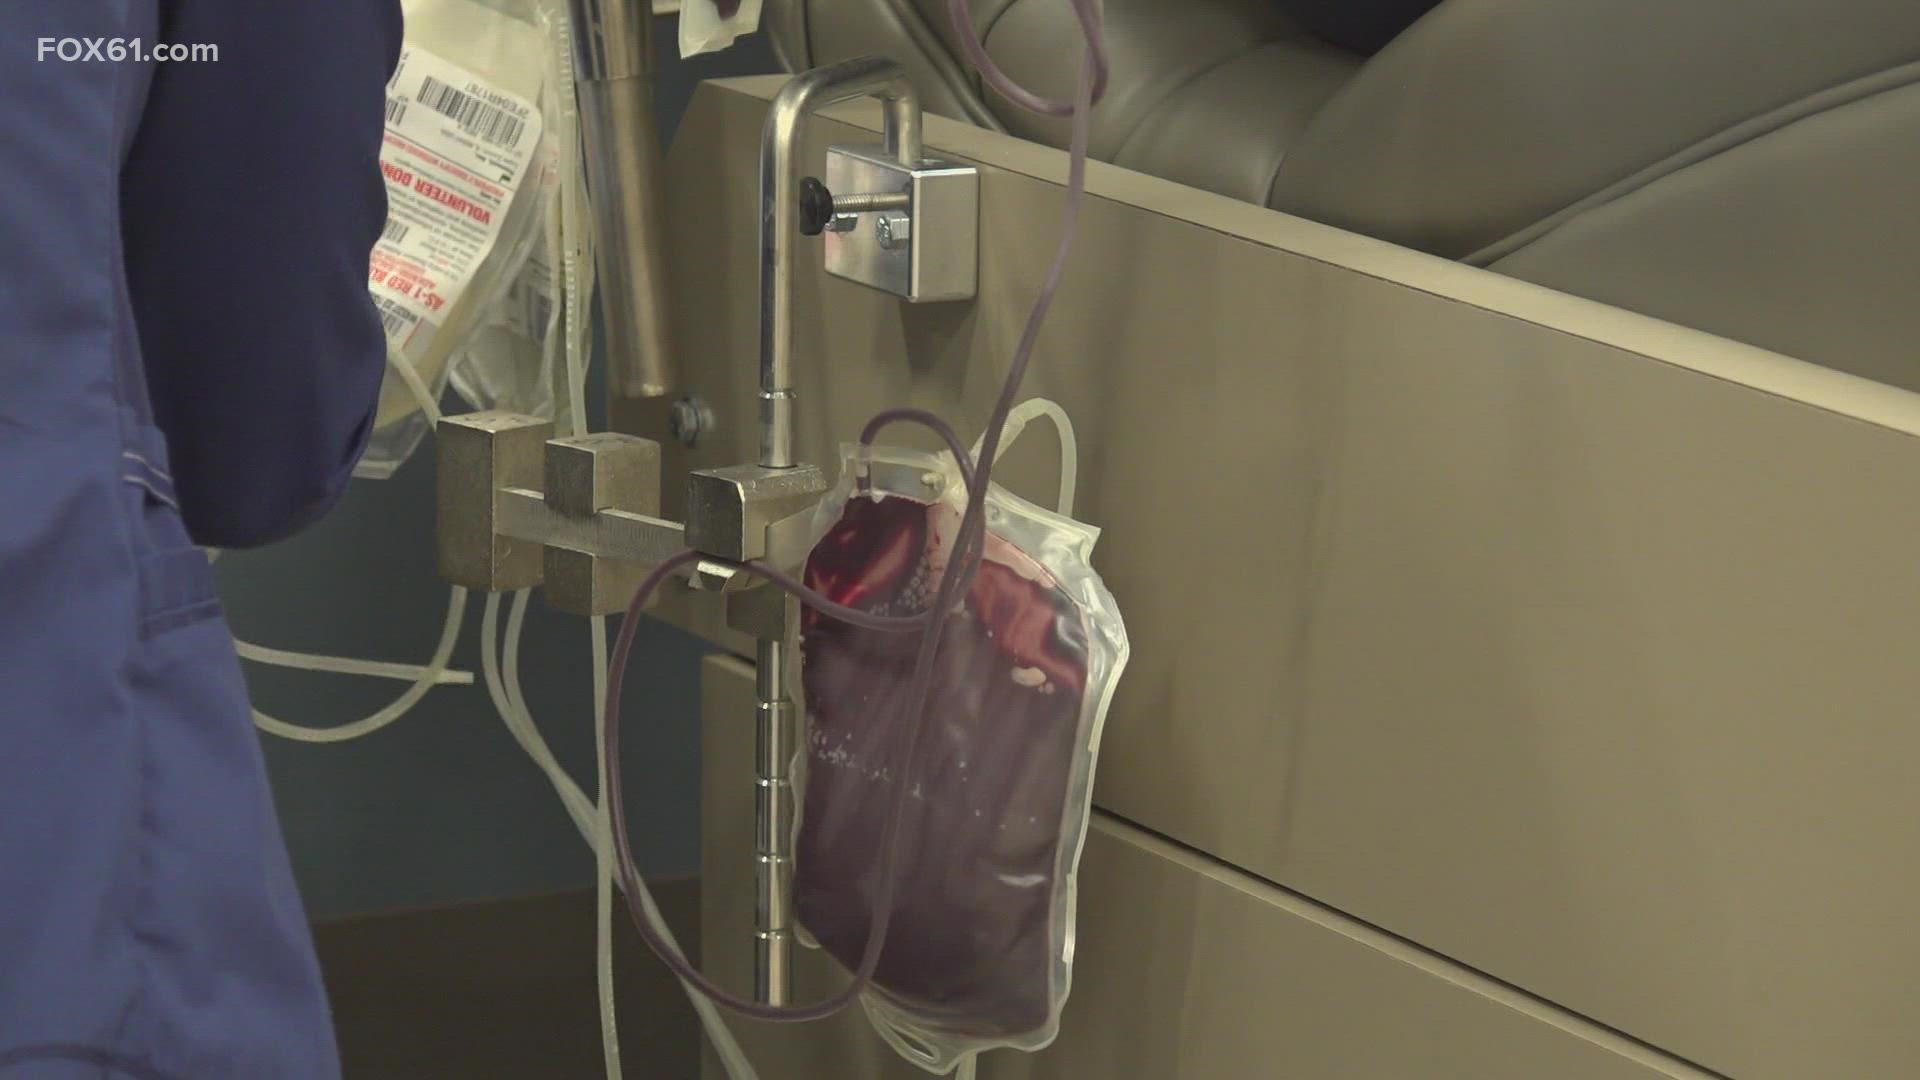 The Arkansas Blood Institute says it's seeing a shortage of blood bag kits for the double red cell procedure.